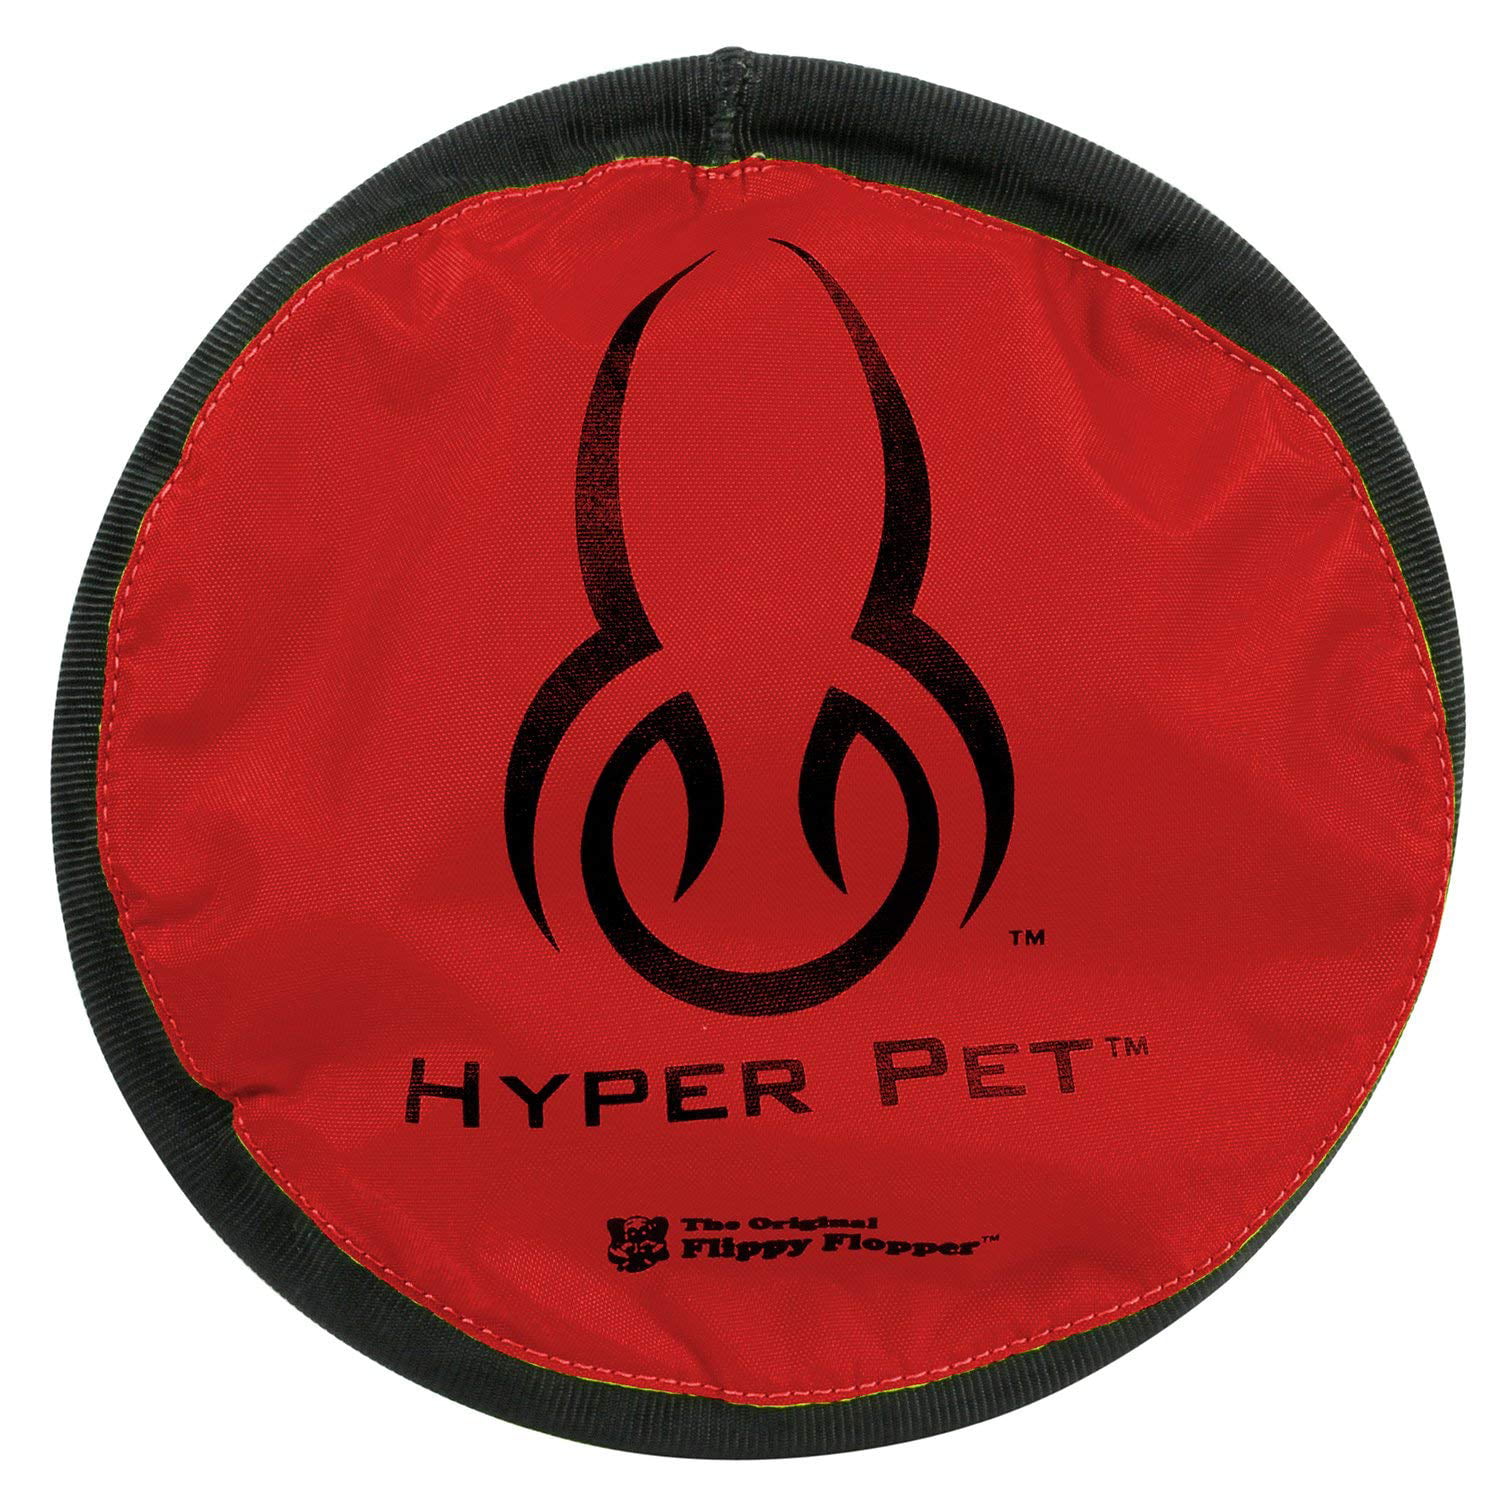 best soft frisbee for dogs